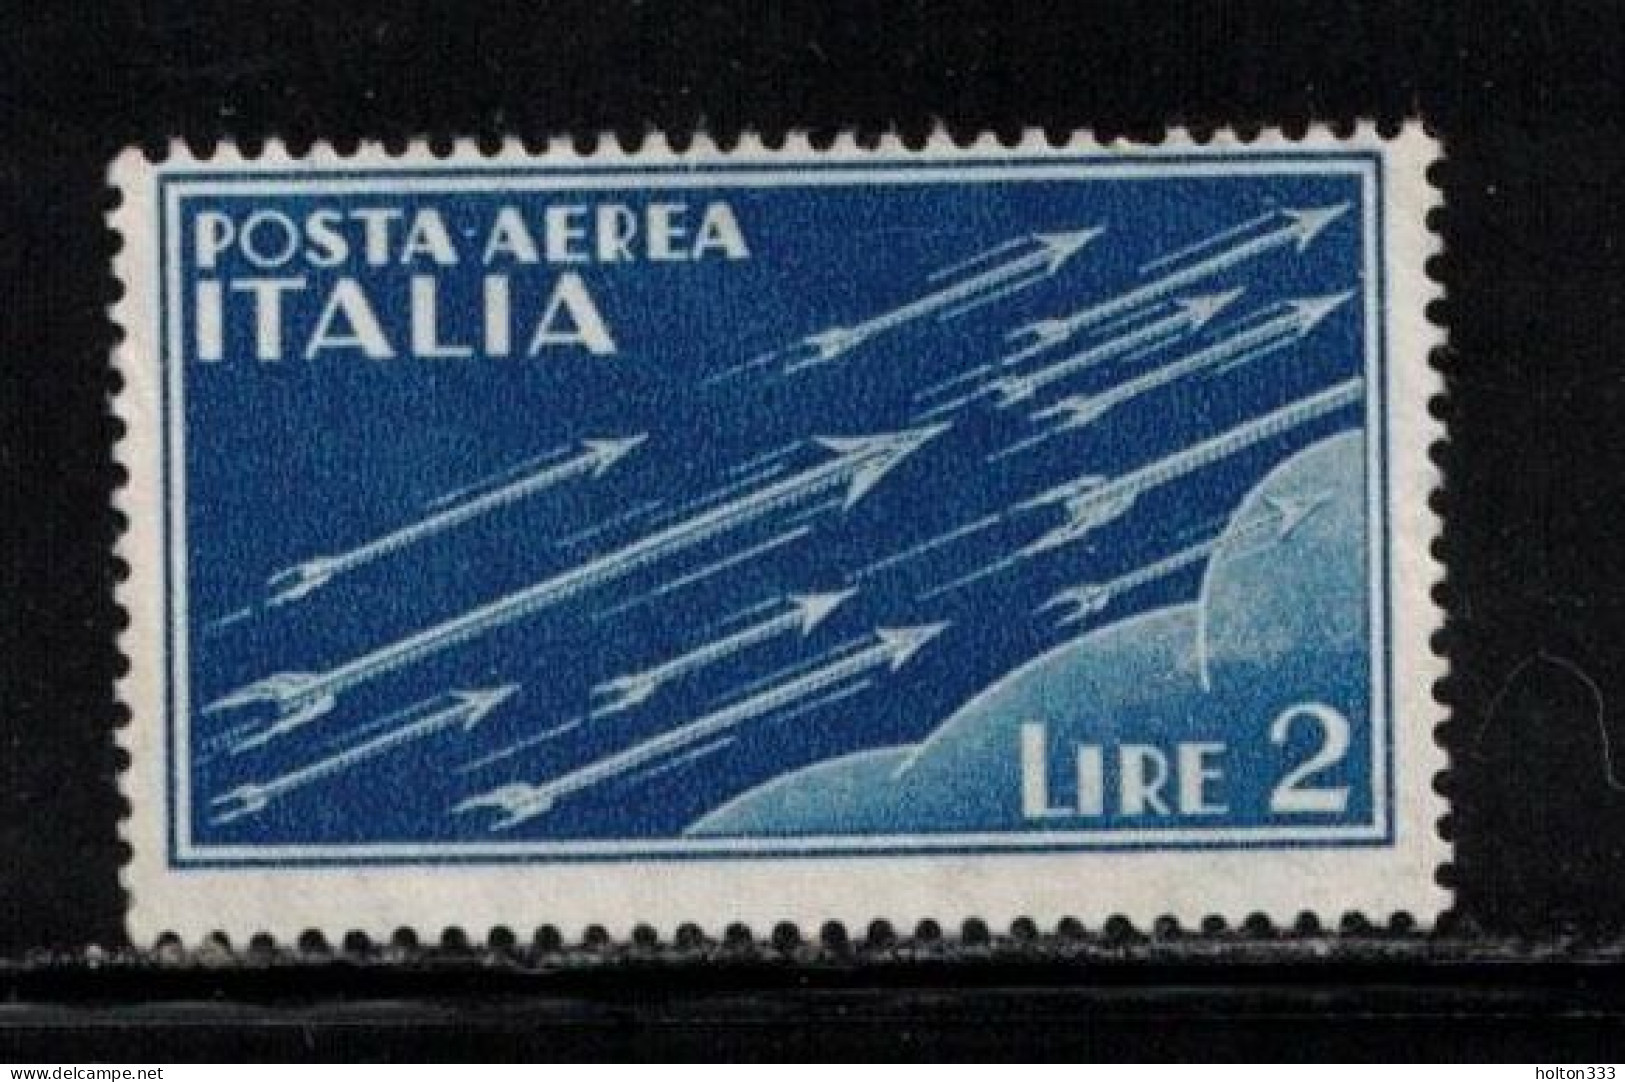 ITALY Scott # C17 Used - Airmail Stamp - 1946-60: Usados